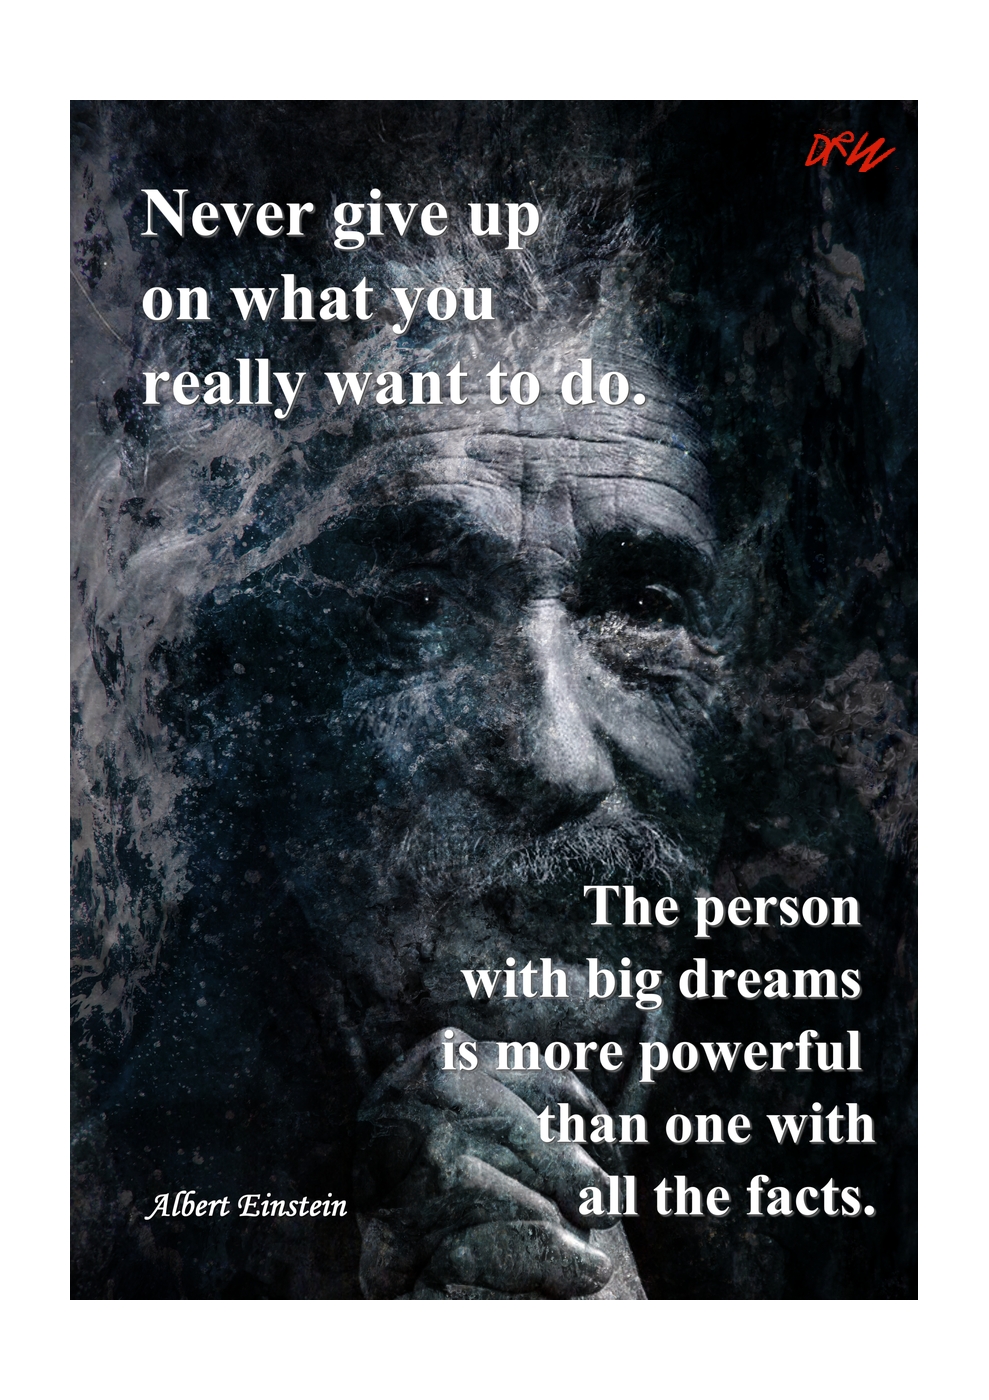 Never give up on what you really want to do. The person with big dreams is more powerful than one with all the facts. ~ Albert Einstein